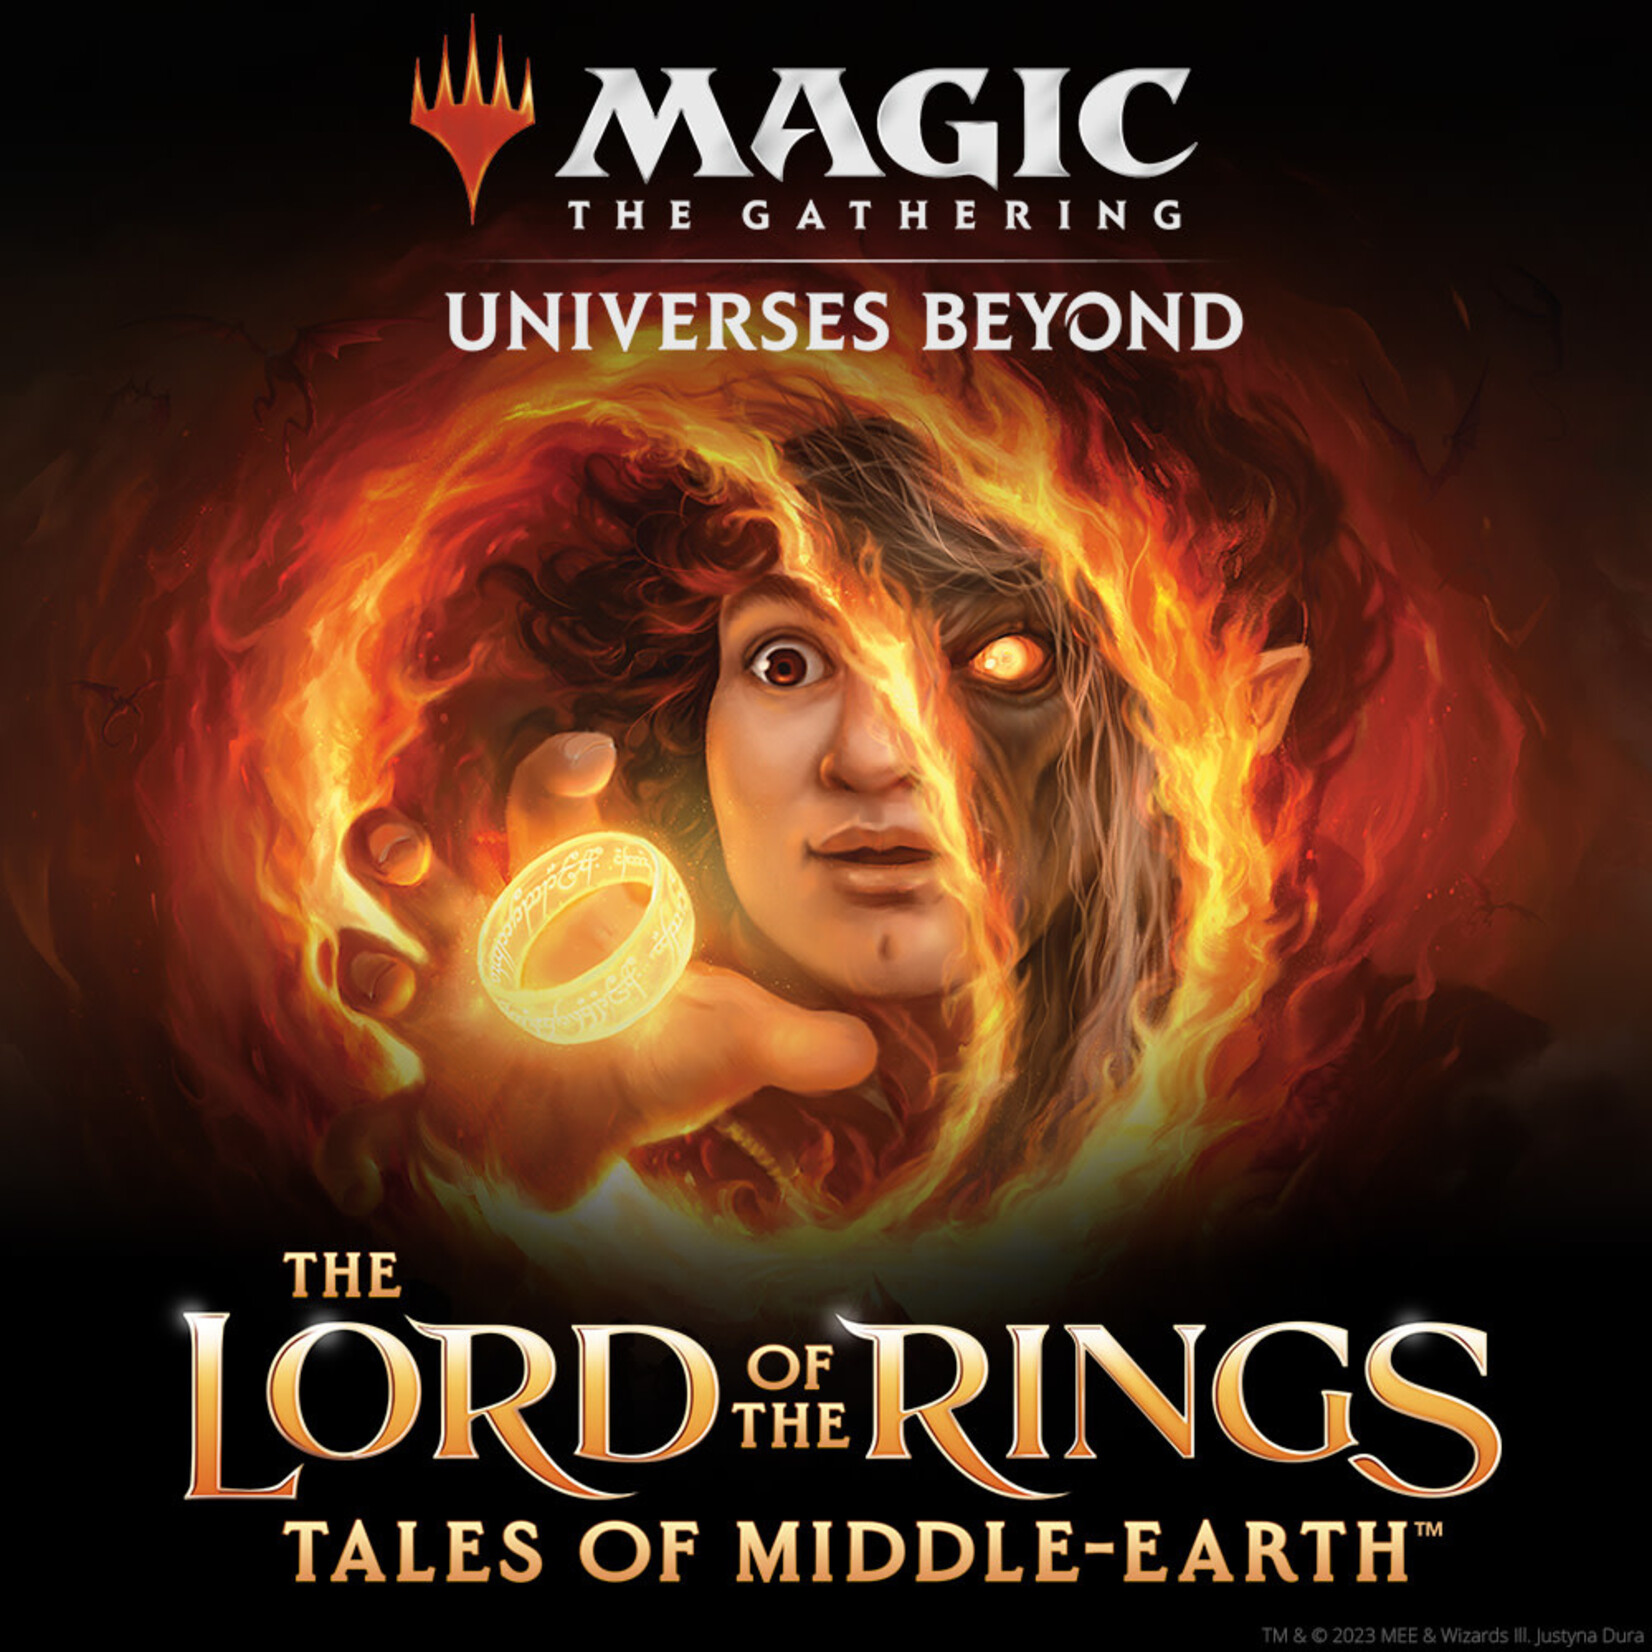 Wizards of the Coast Admission: Lord of the Rings - Tales of Middle-Earth Draft Launch Party - Downers Grove - 6/24 (5 pm)